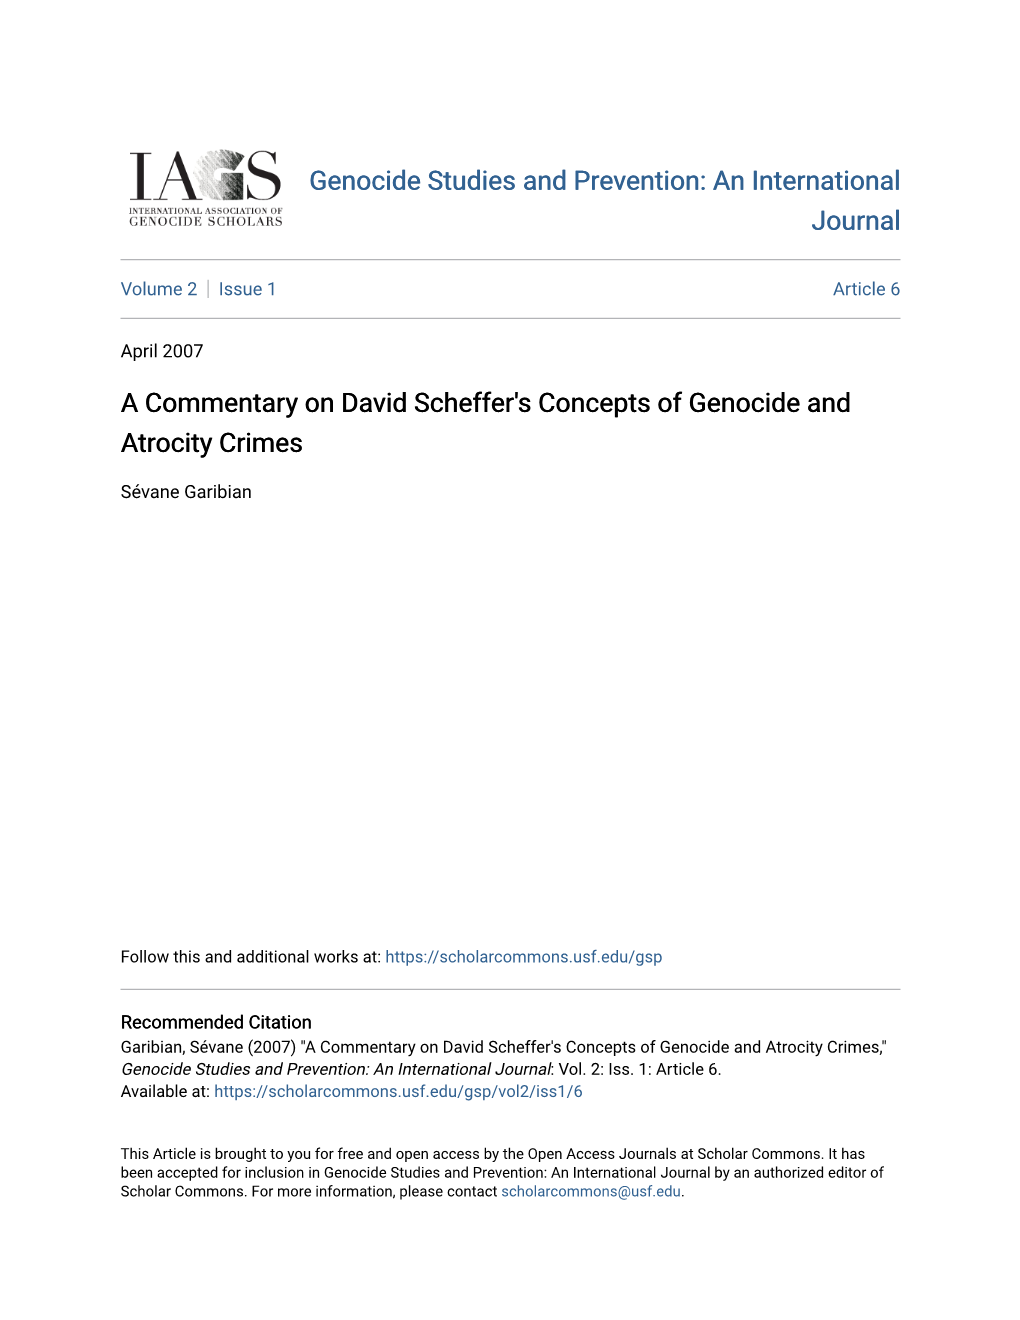 A Commentary on David Scheffer's Concepts of Genocide and Atrocity Crimes